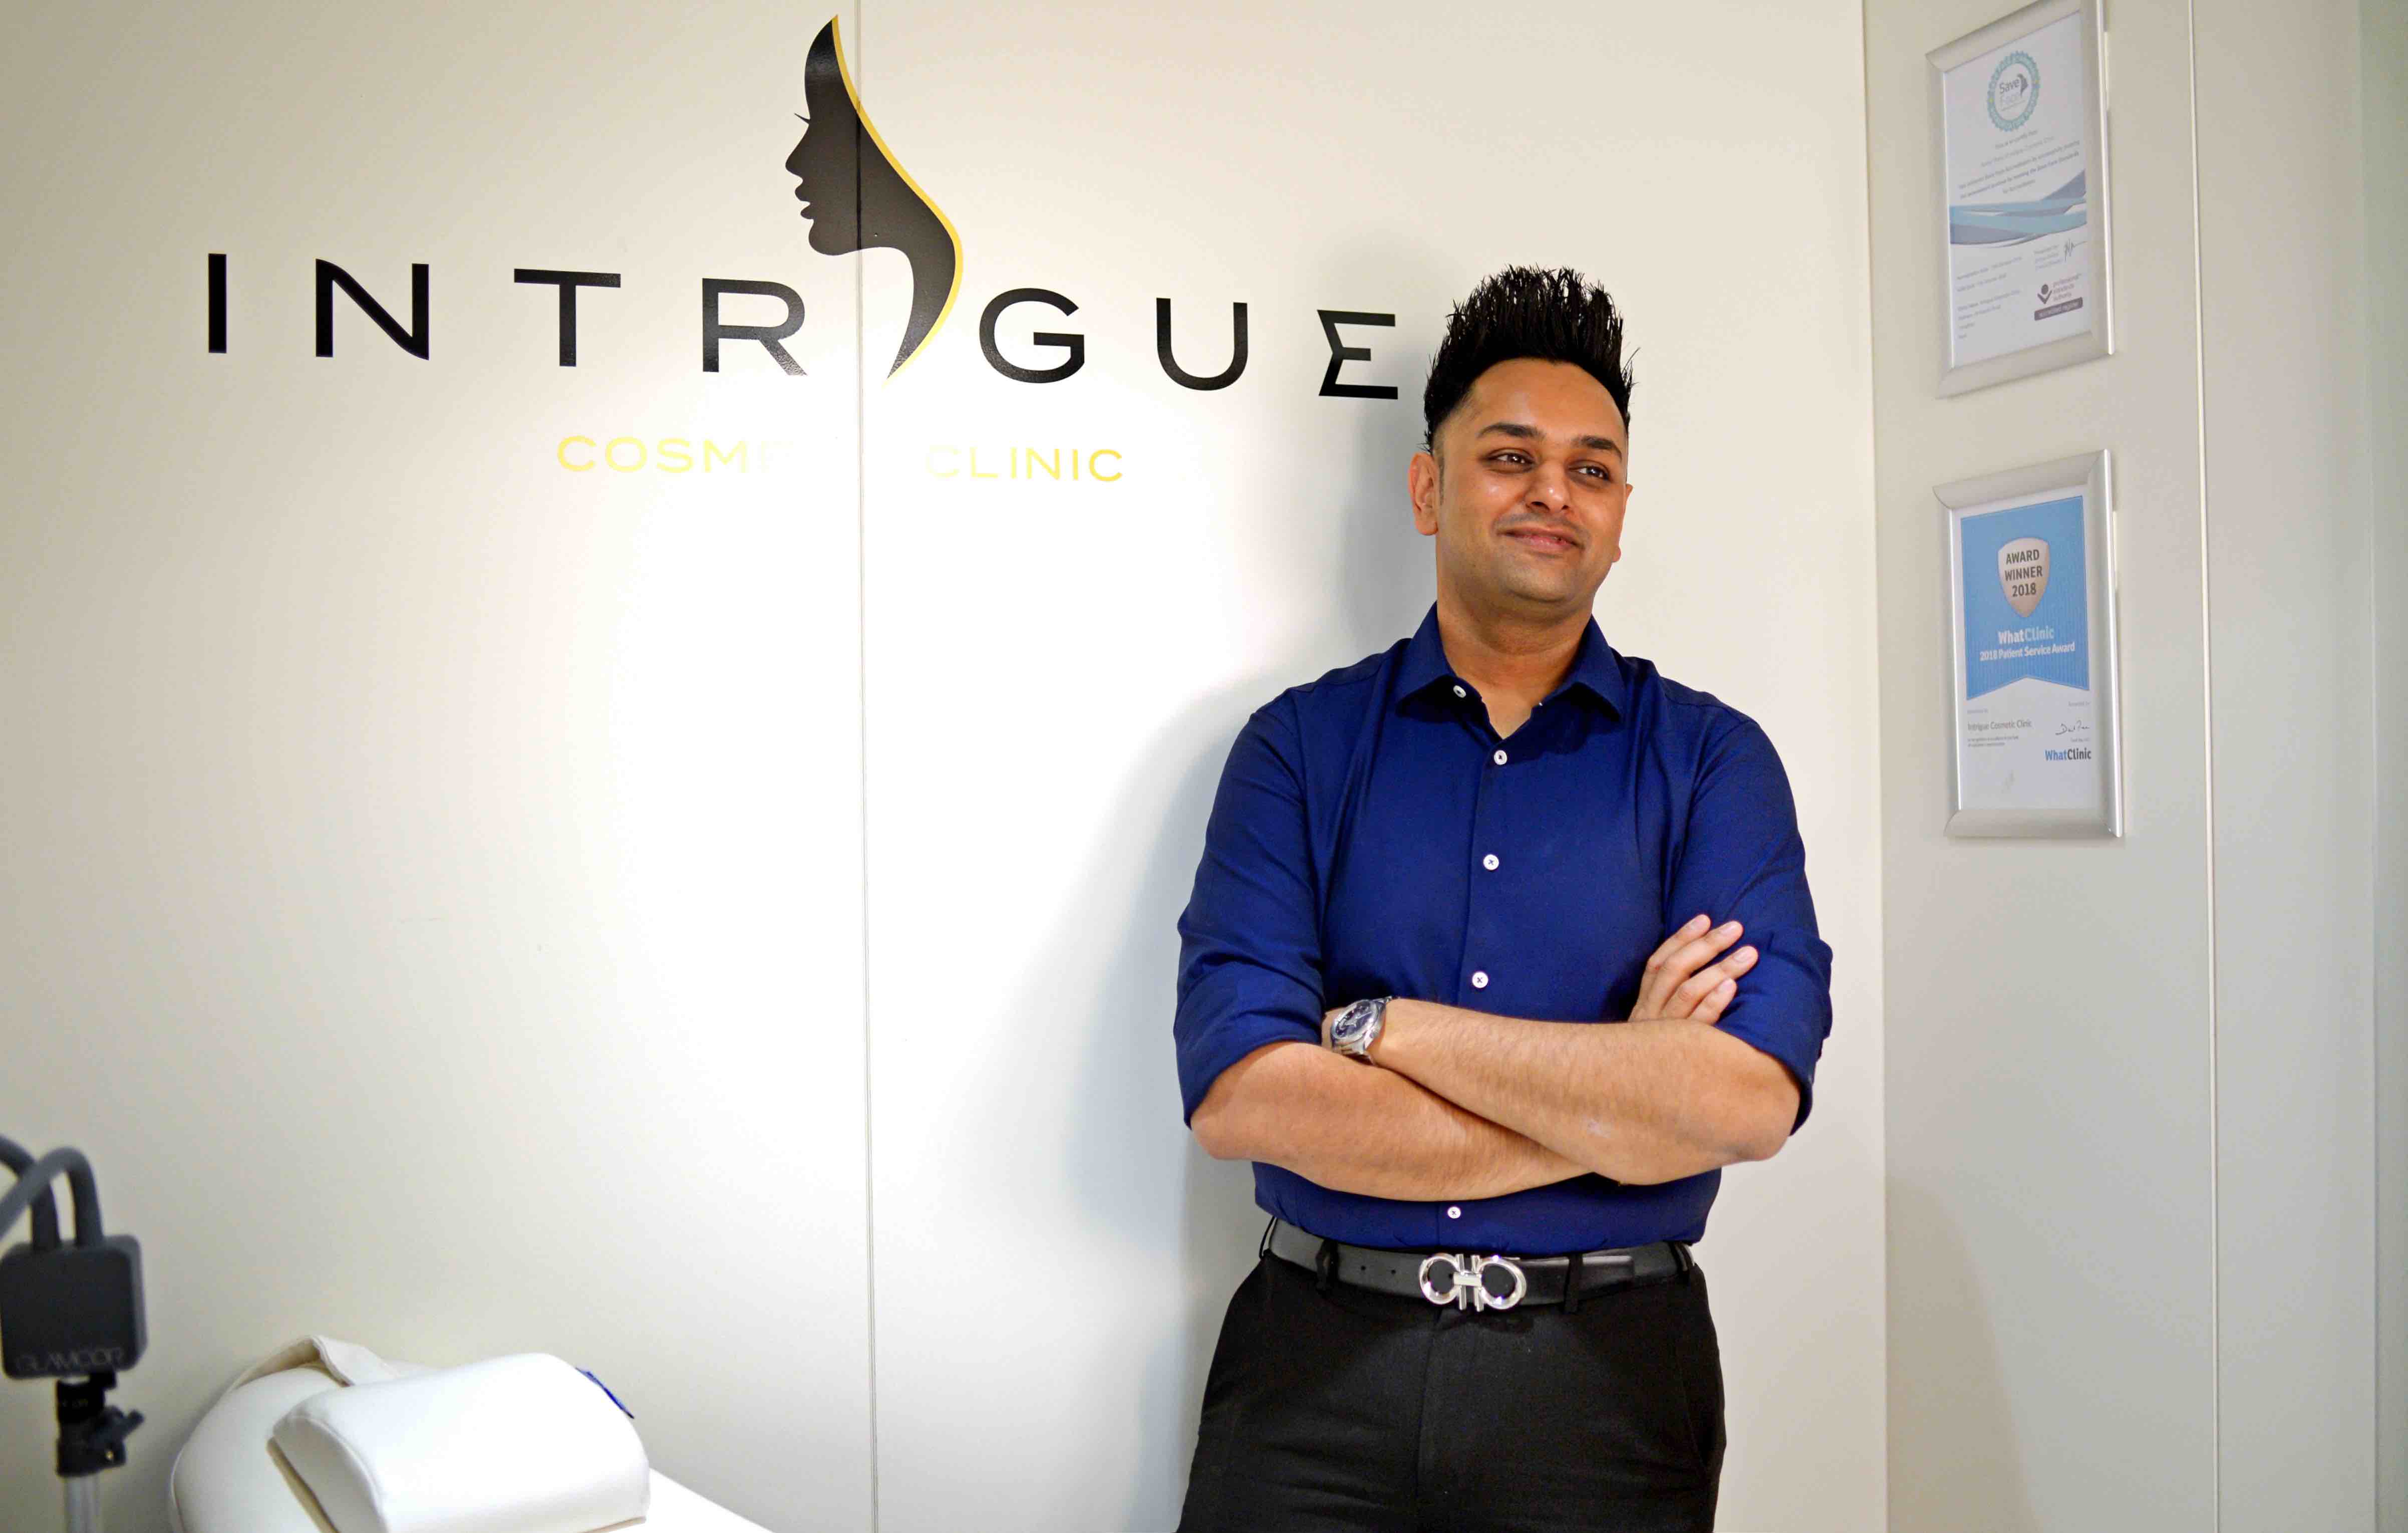 Intrigue Cosmetic Clinic appoints MirrorMe PR